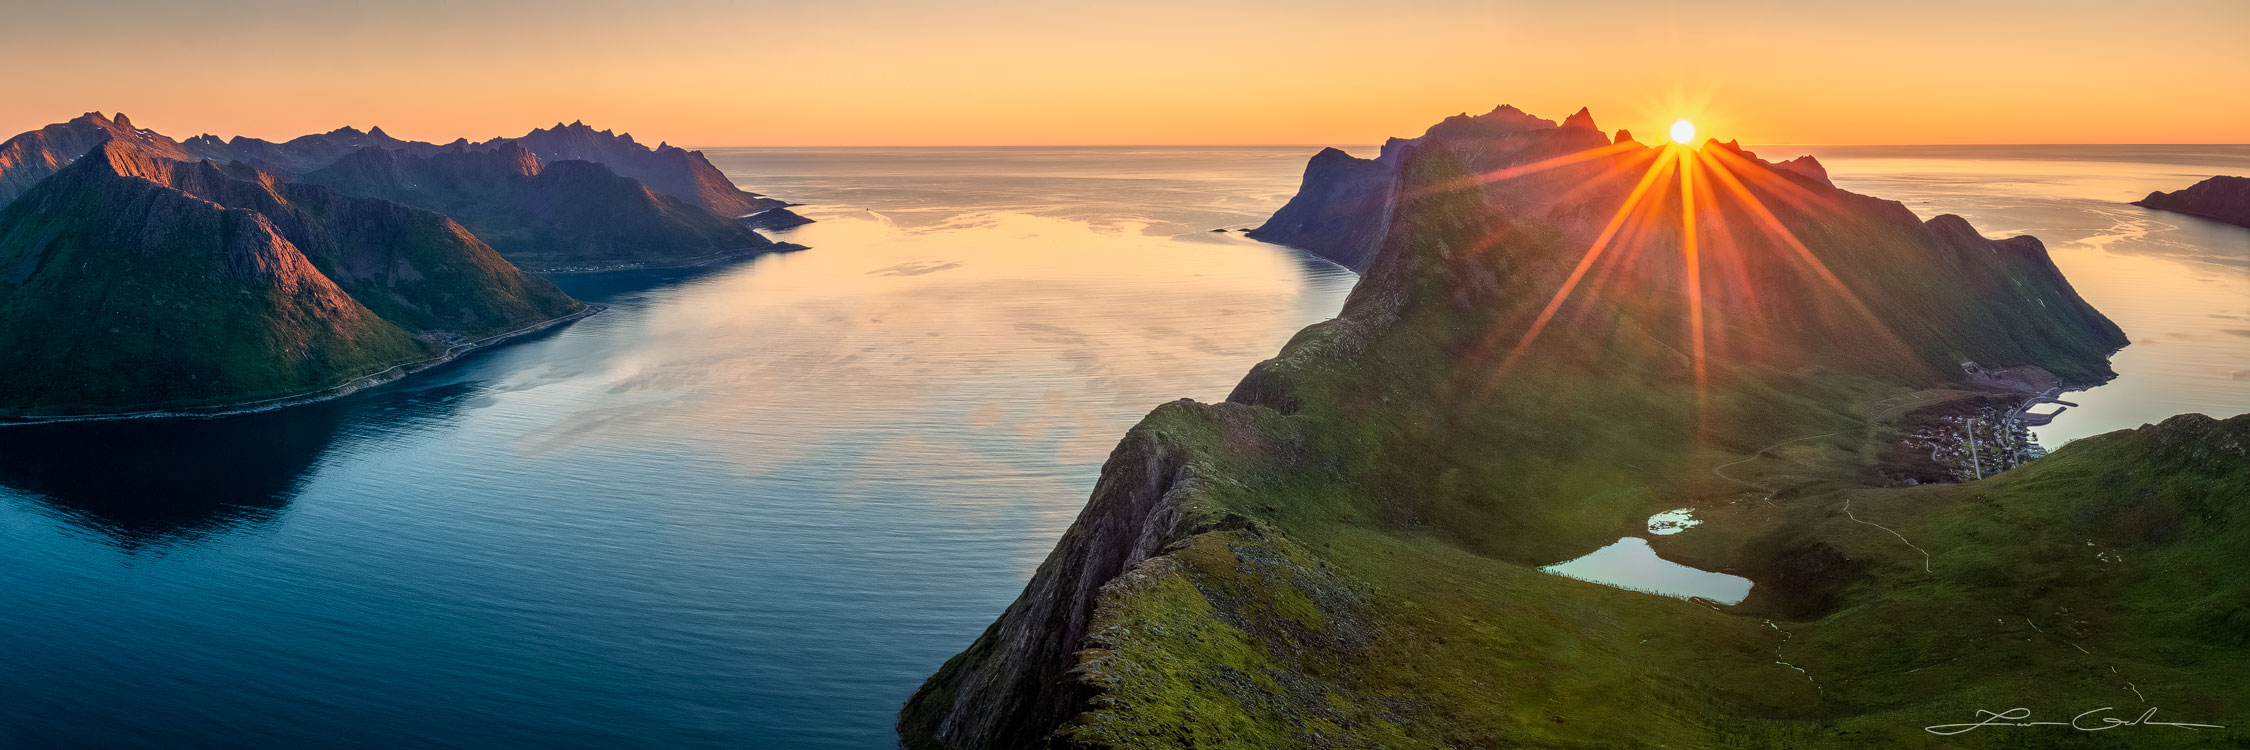 A sunset over mountains, ocean, and fjords in Senja, Norway - Gintchin Fine Art